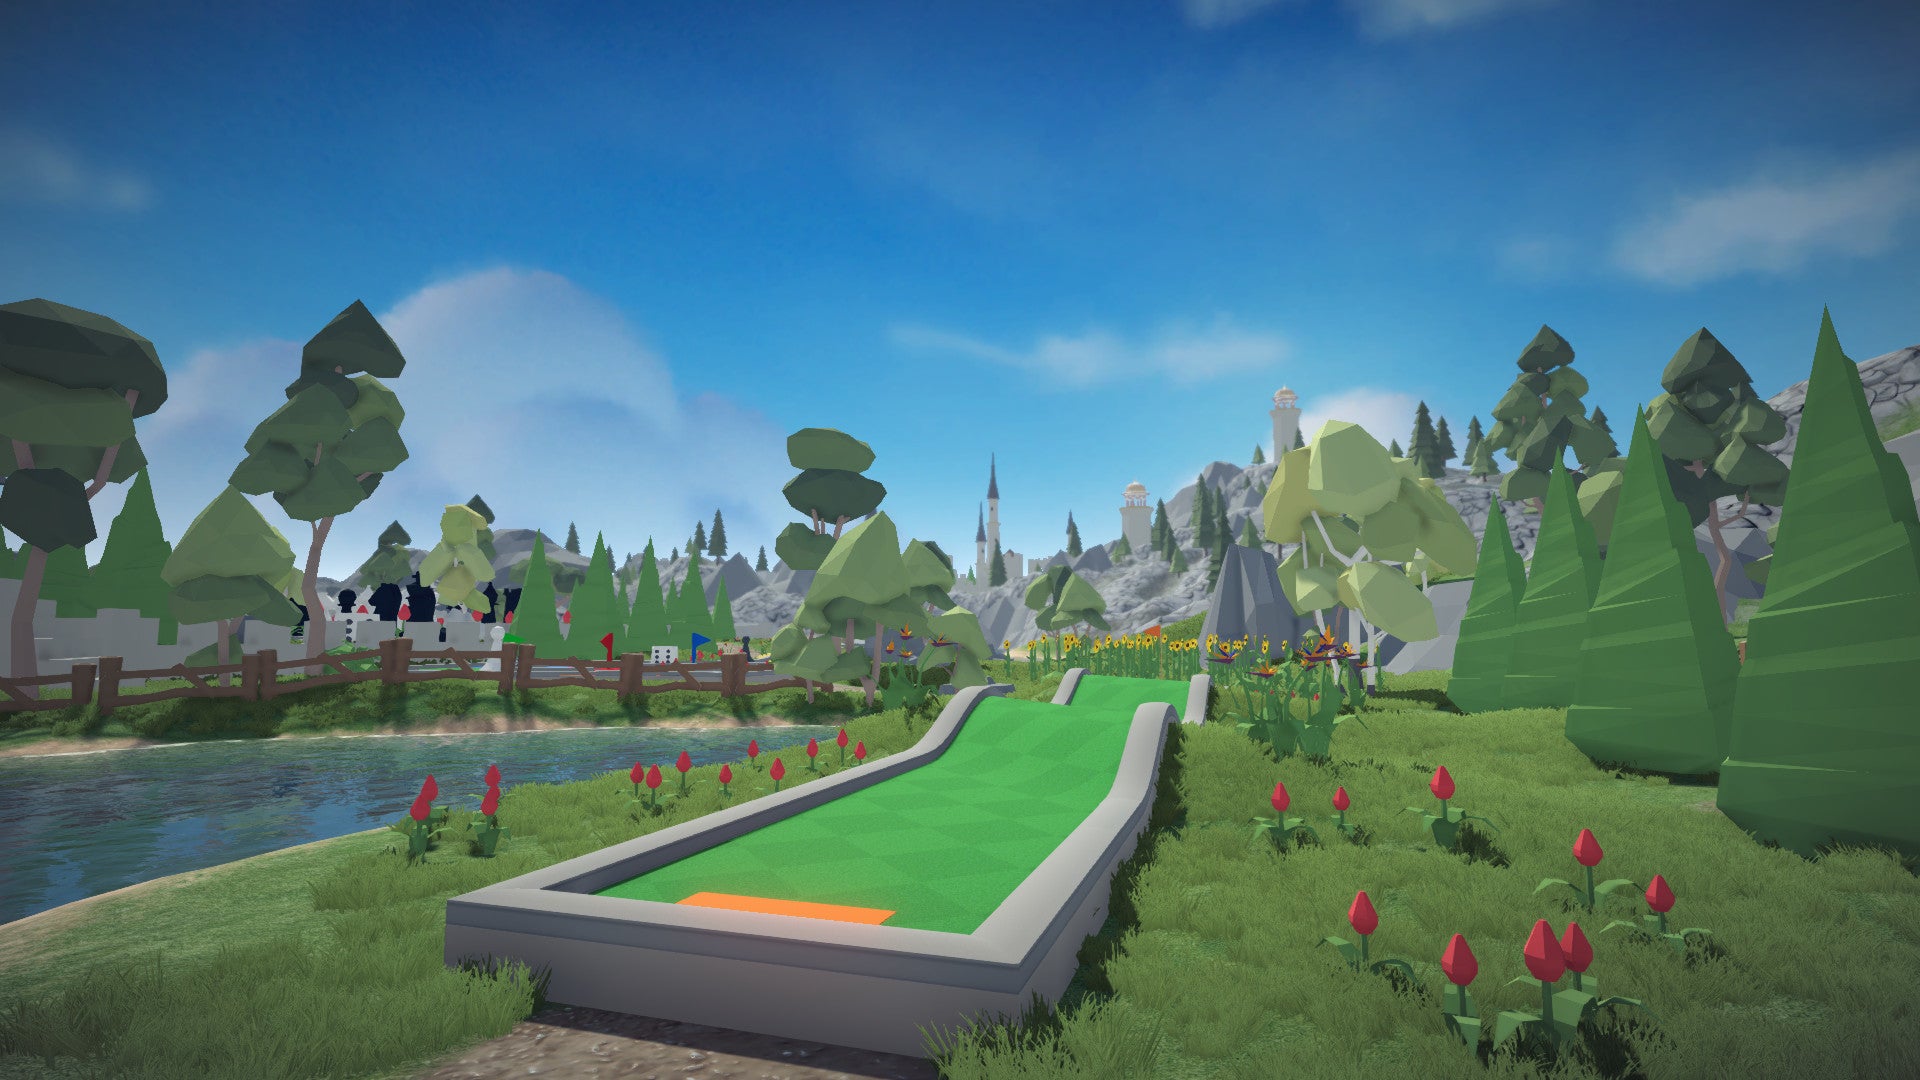 A screenshot of MiniGolf Maker showing a grassy, tree-covered field, with a mini golf course through it.